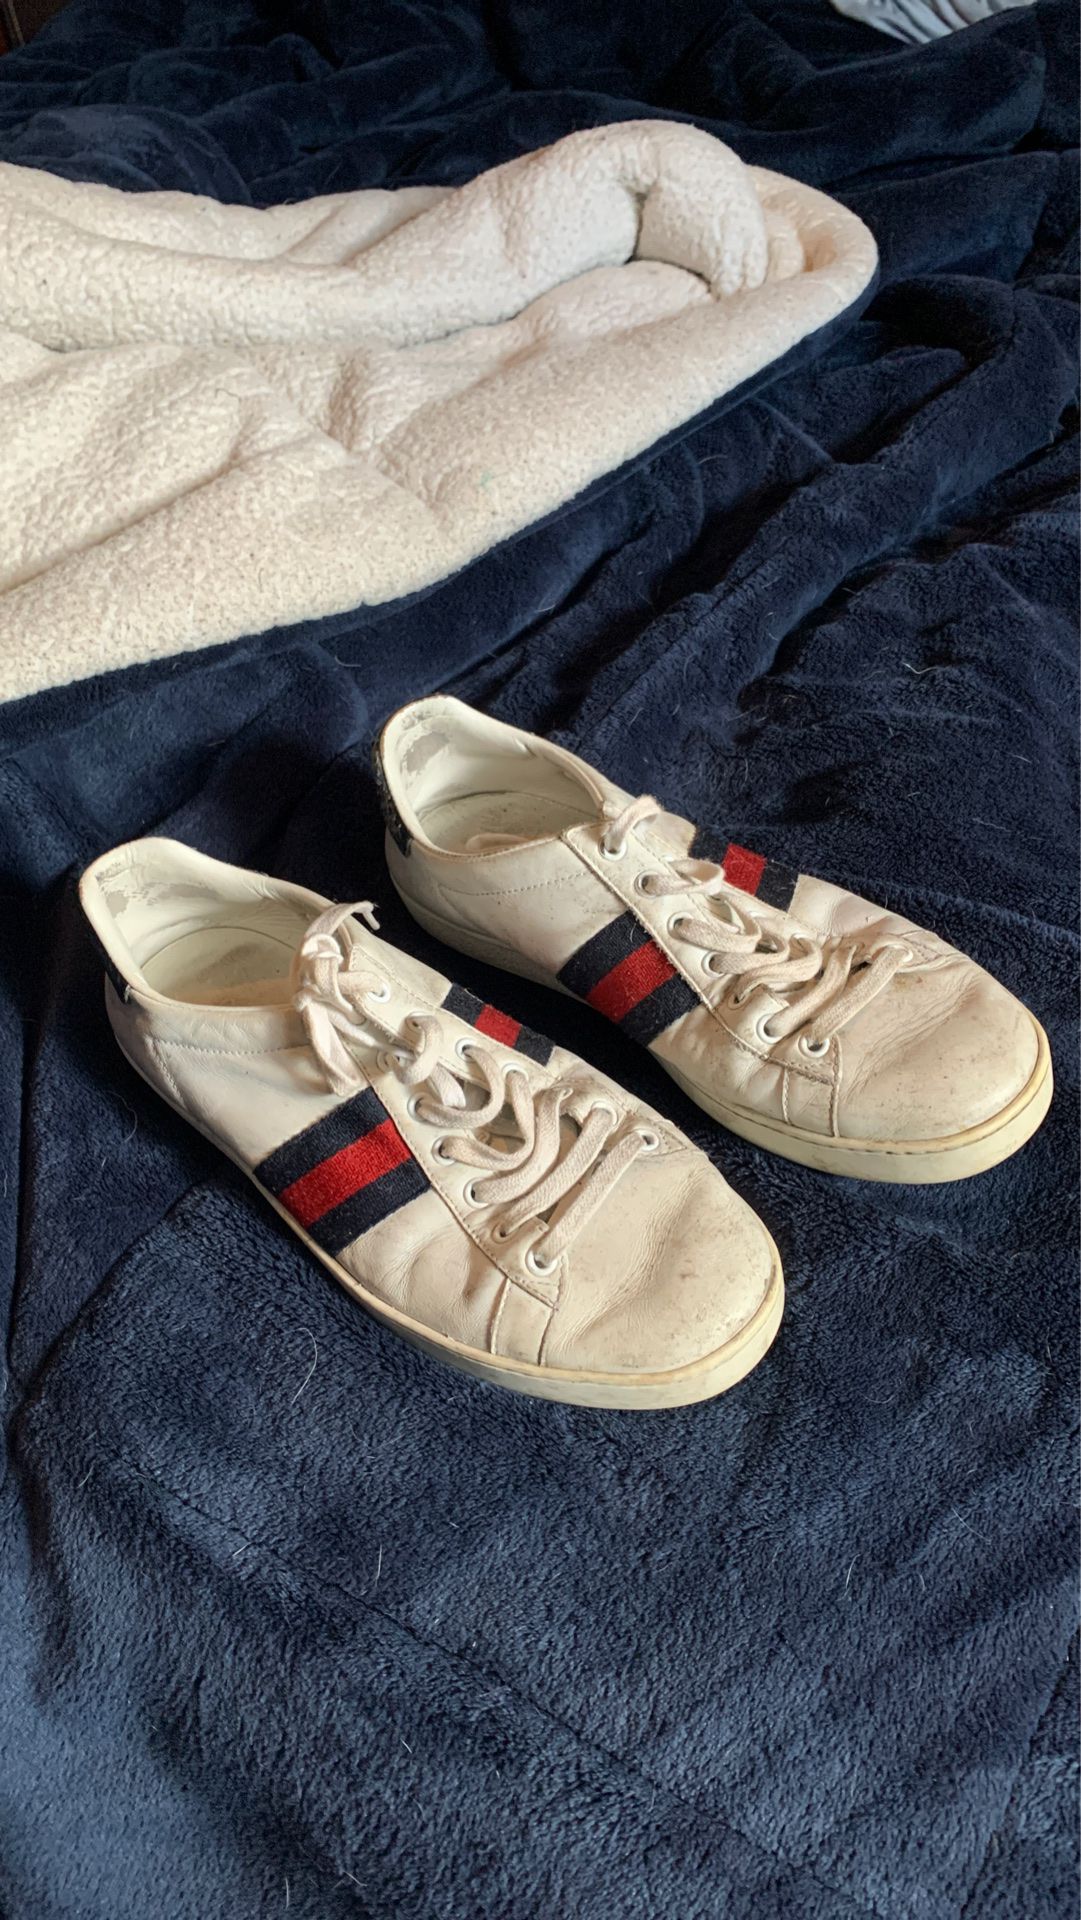 Used Gucci shoes